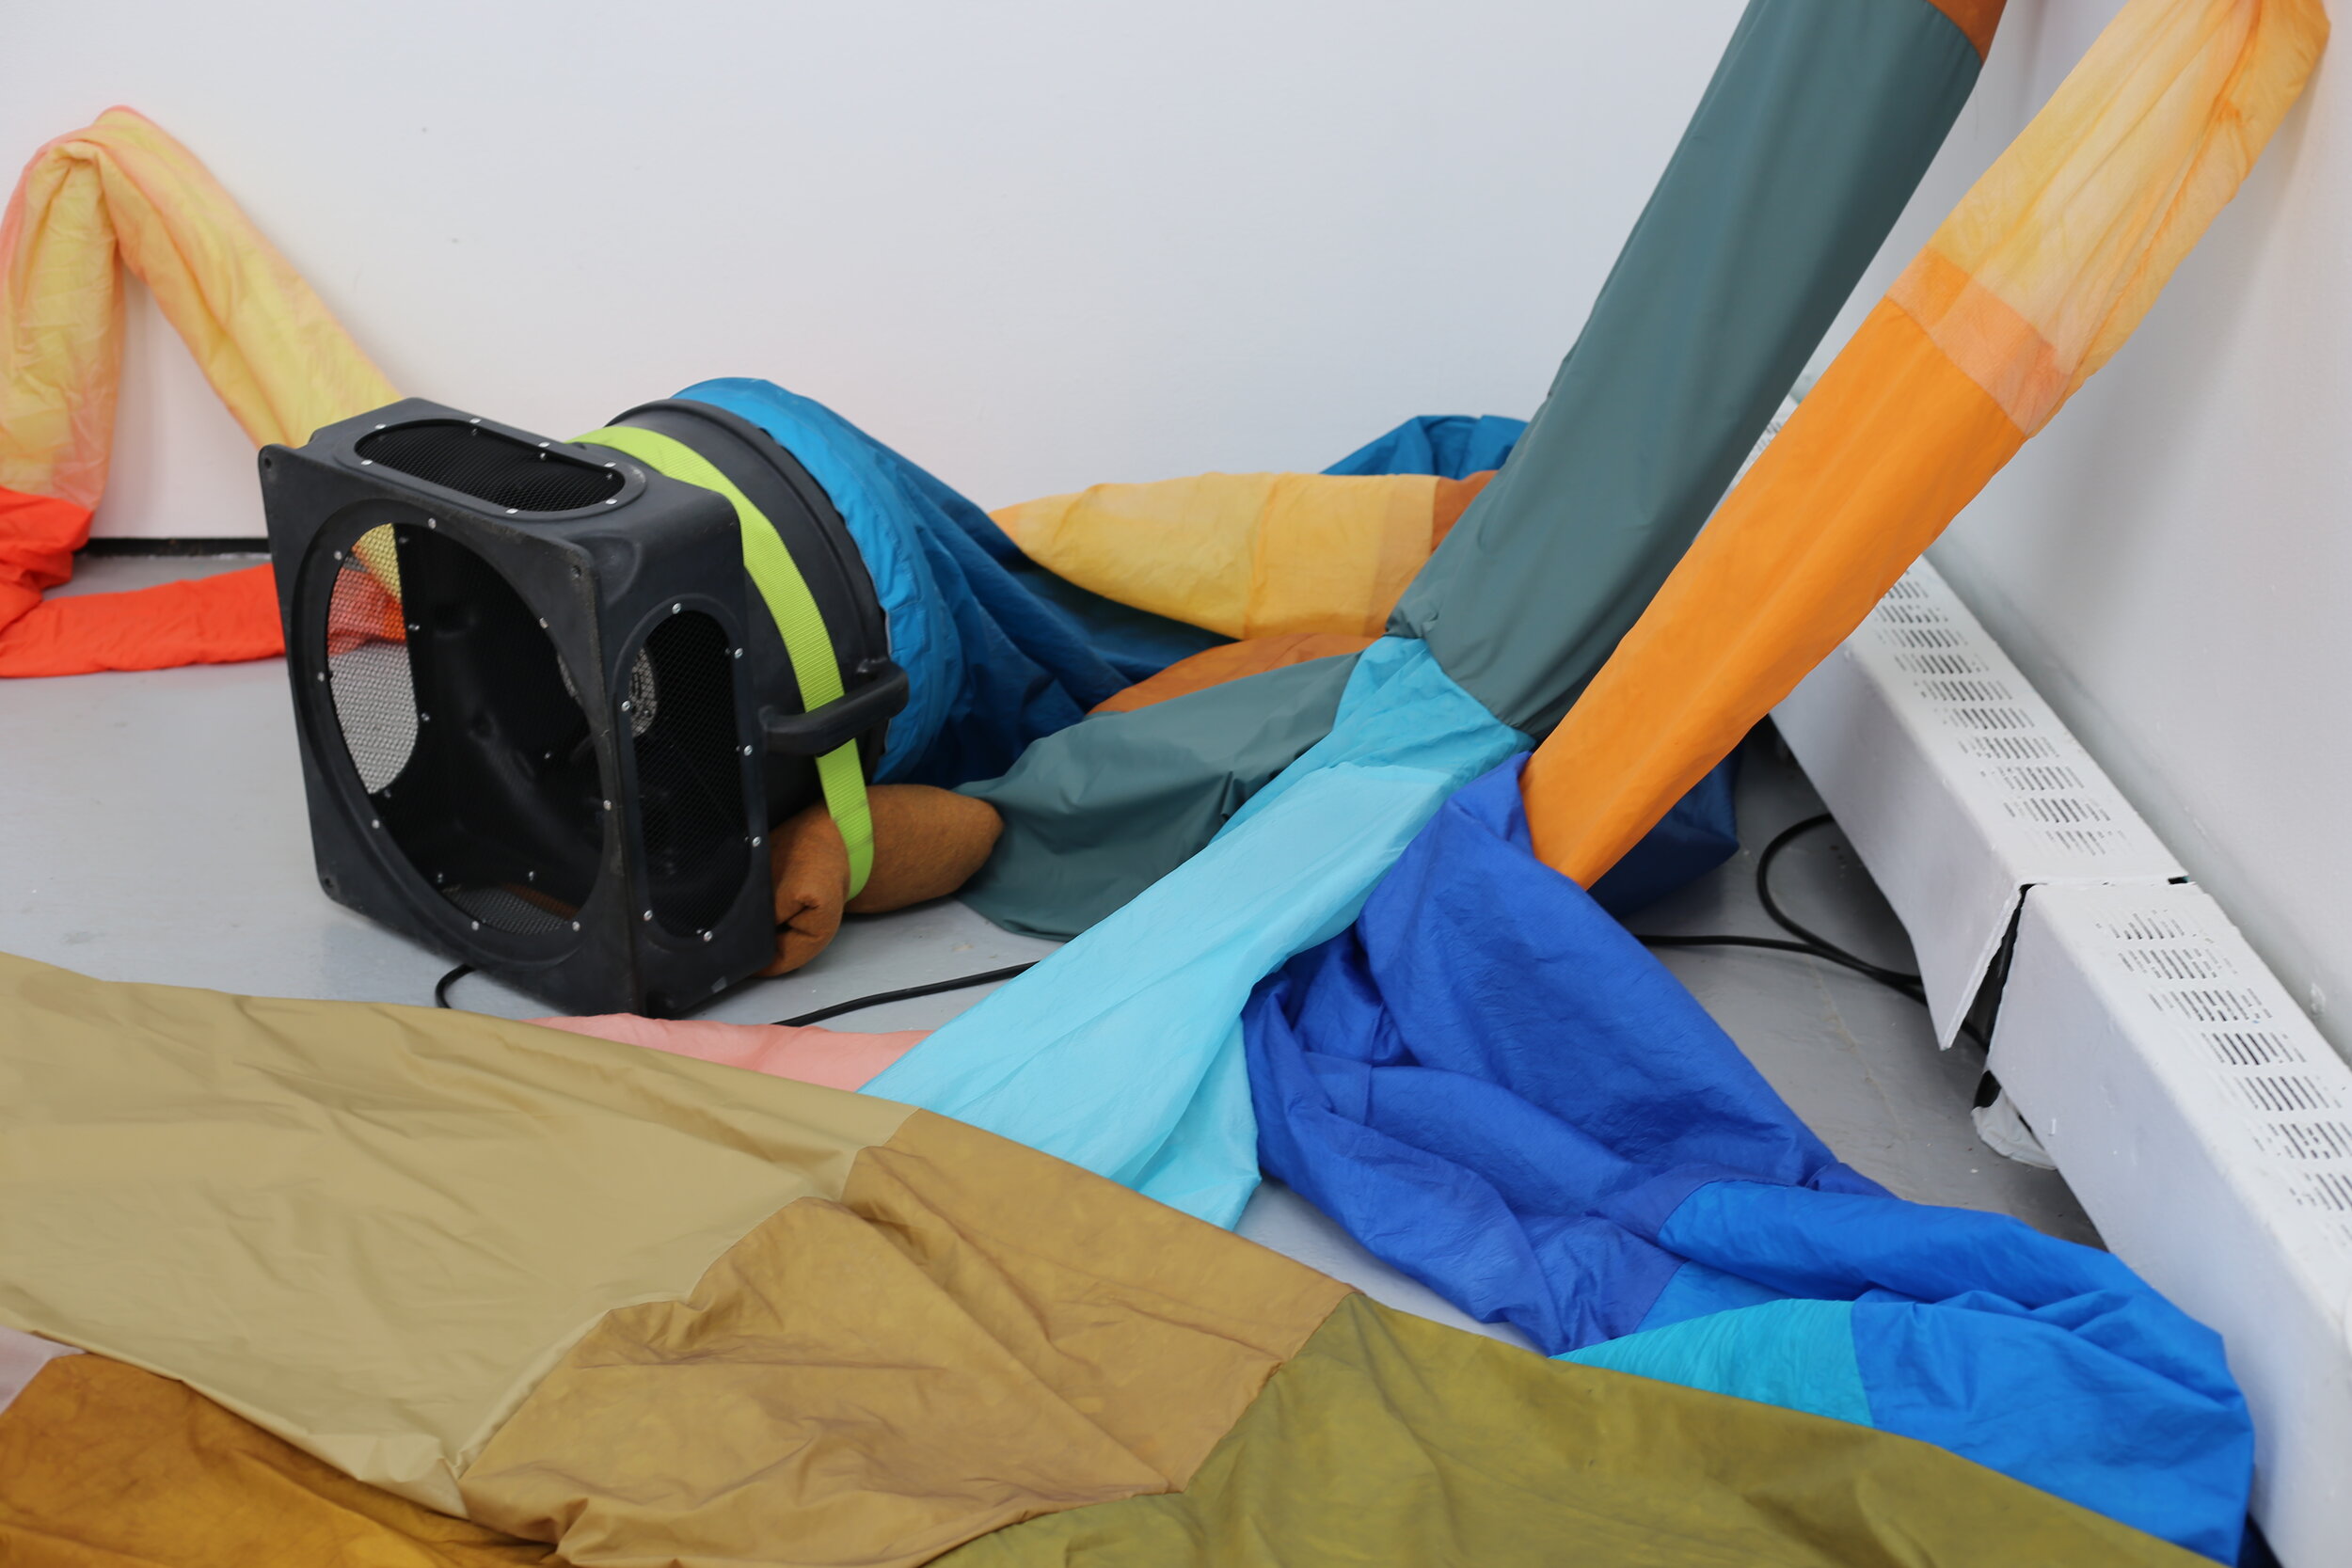  Peyton Peyton  Labber Rinse Repeat , 2020 (detail) thread, acid-dyed nylon, plastic tarp, zippers, elastic, velcro, staples,  clear vinyl, air blowers, interval timers, decoy duck butts, cushion dimensions variable to installation photo by Sol Avi E